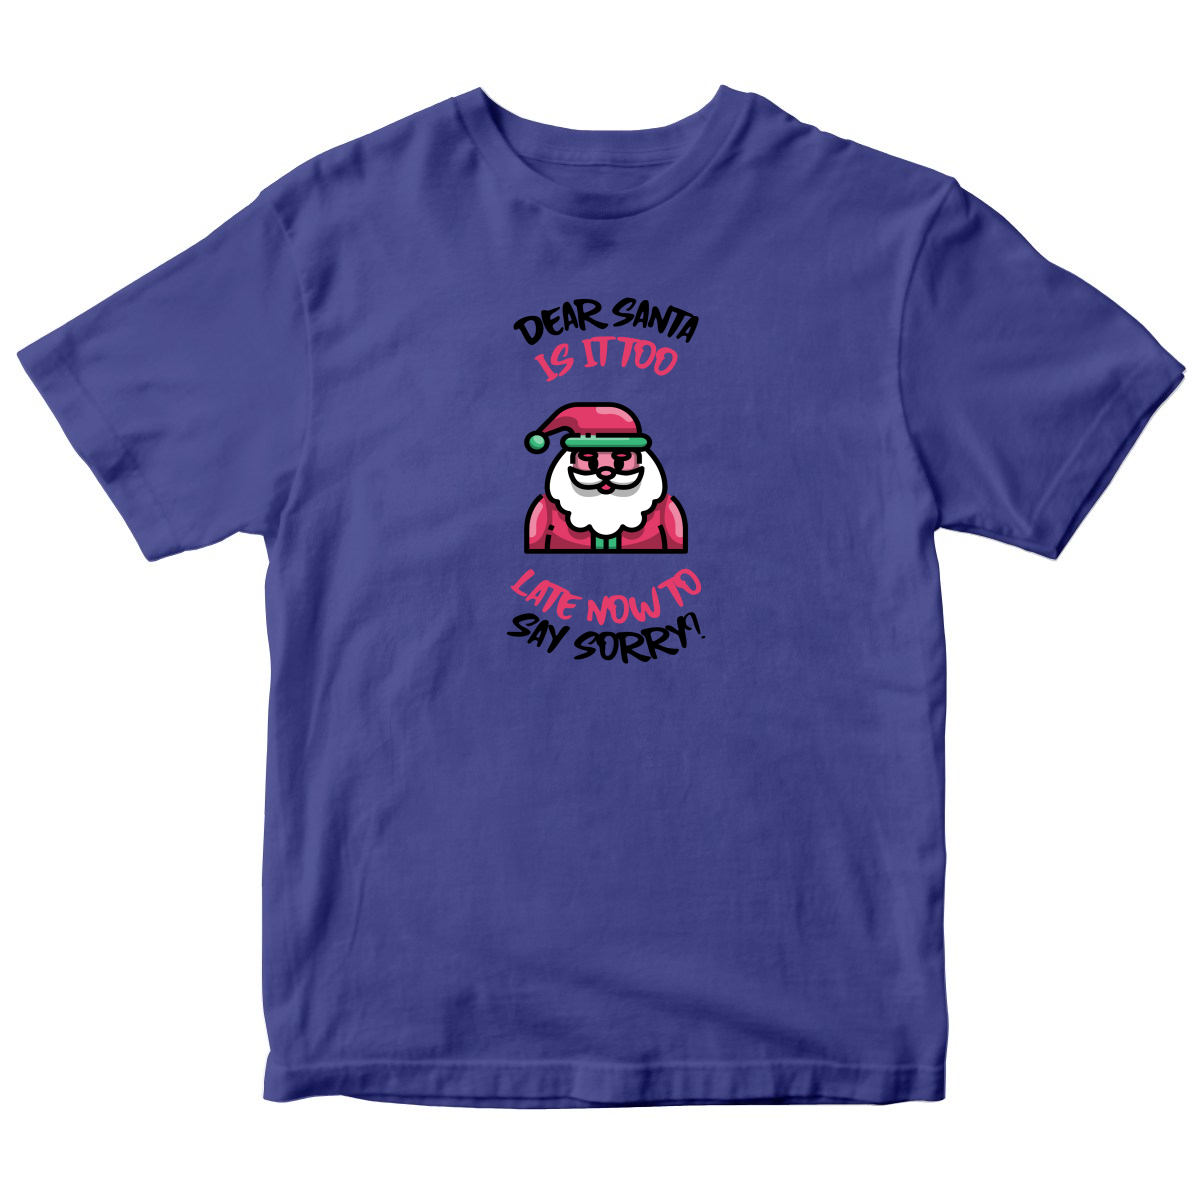 Dear Santa, Is It Too Late to Say Sorry? Kids T-shirt | Blue